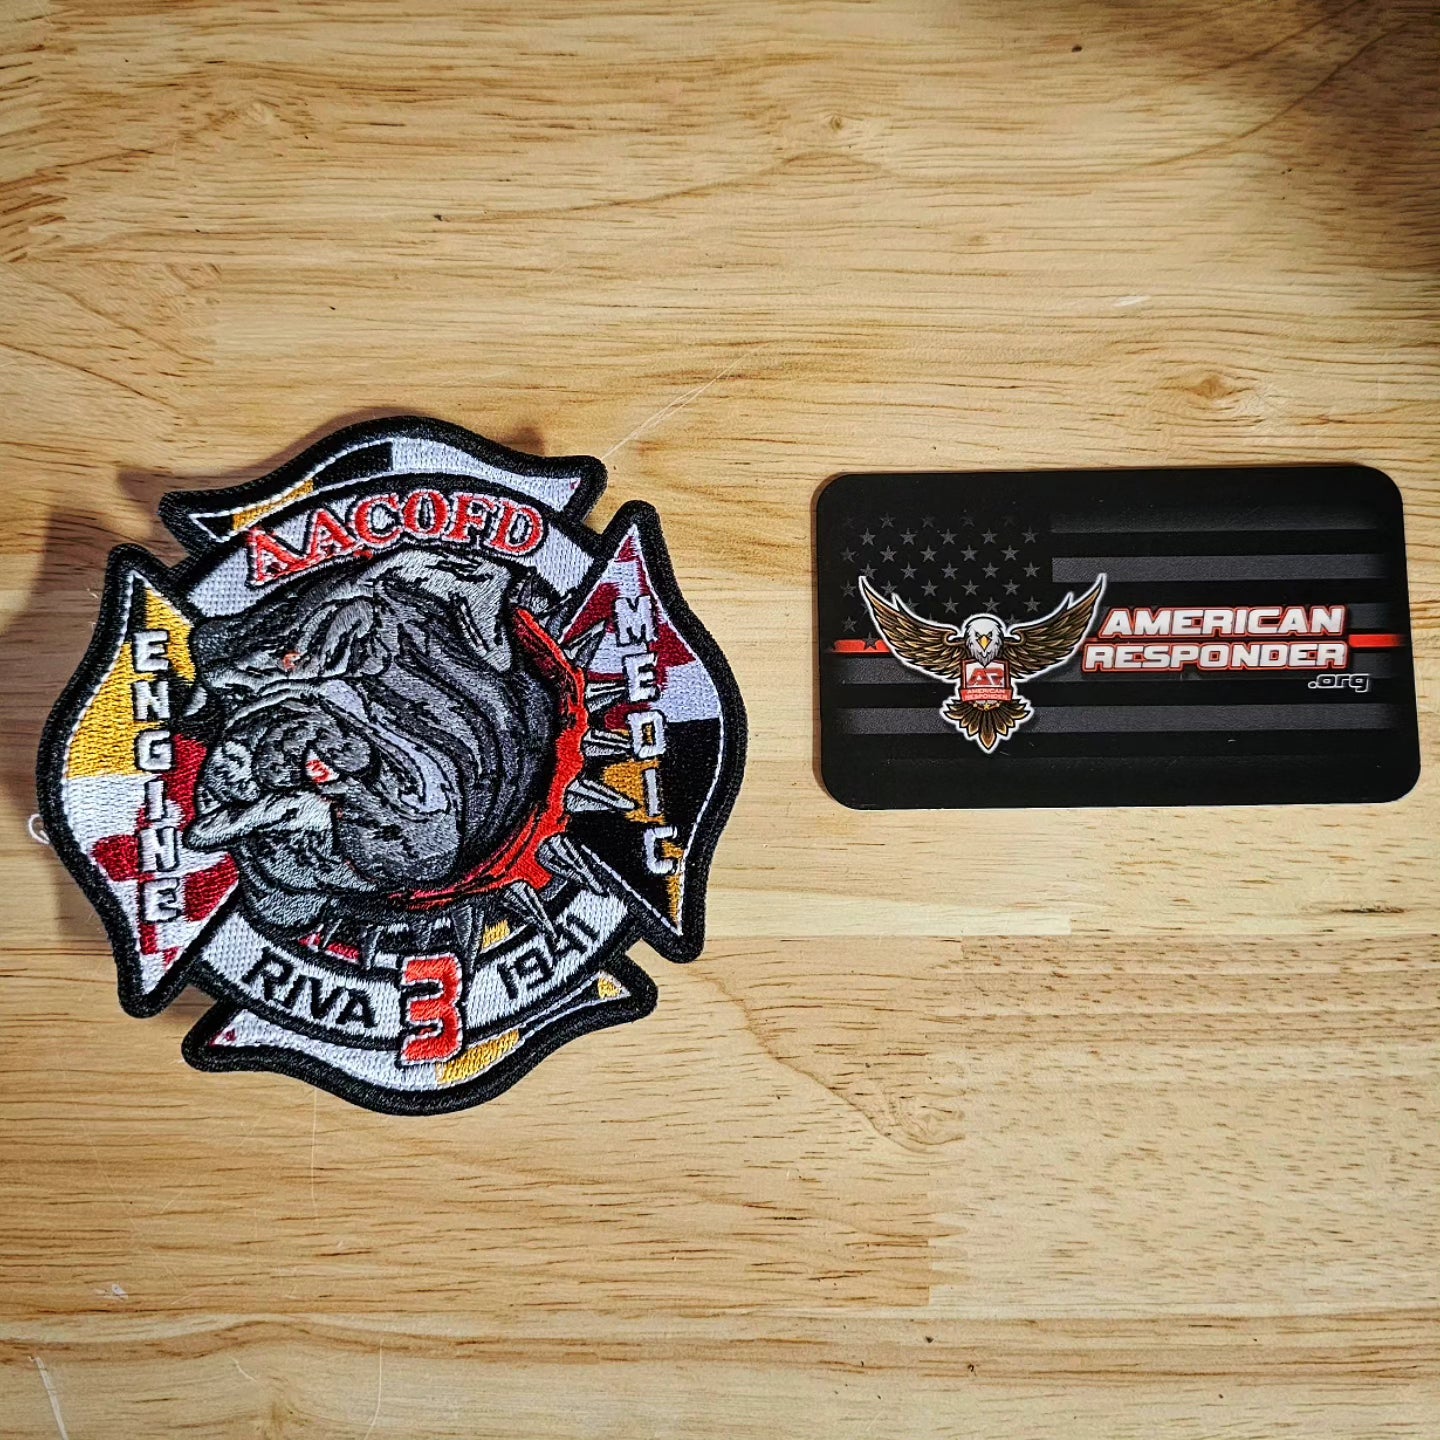 Anne Arundel Station 3 - Riva Embroidered Patch - American Responder Designs